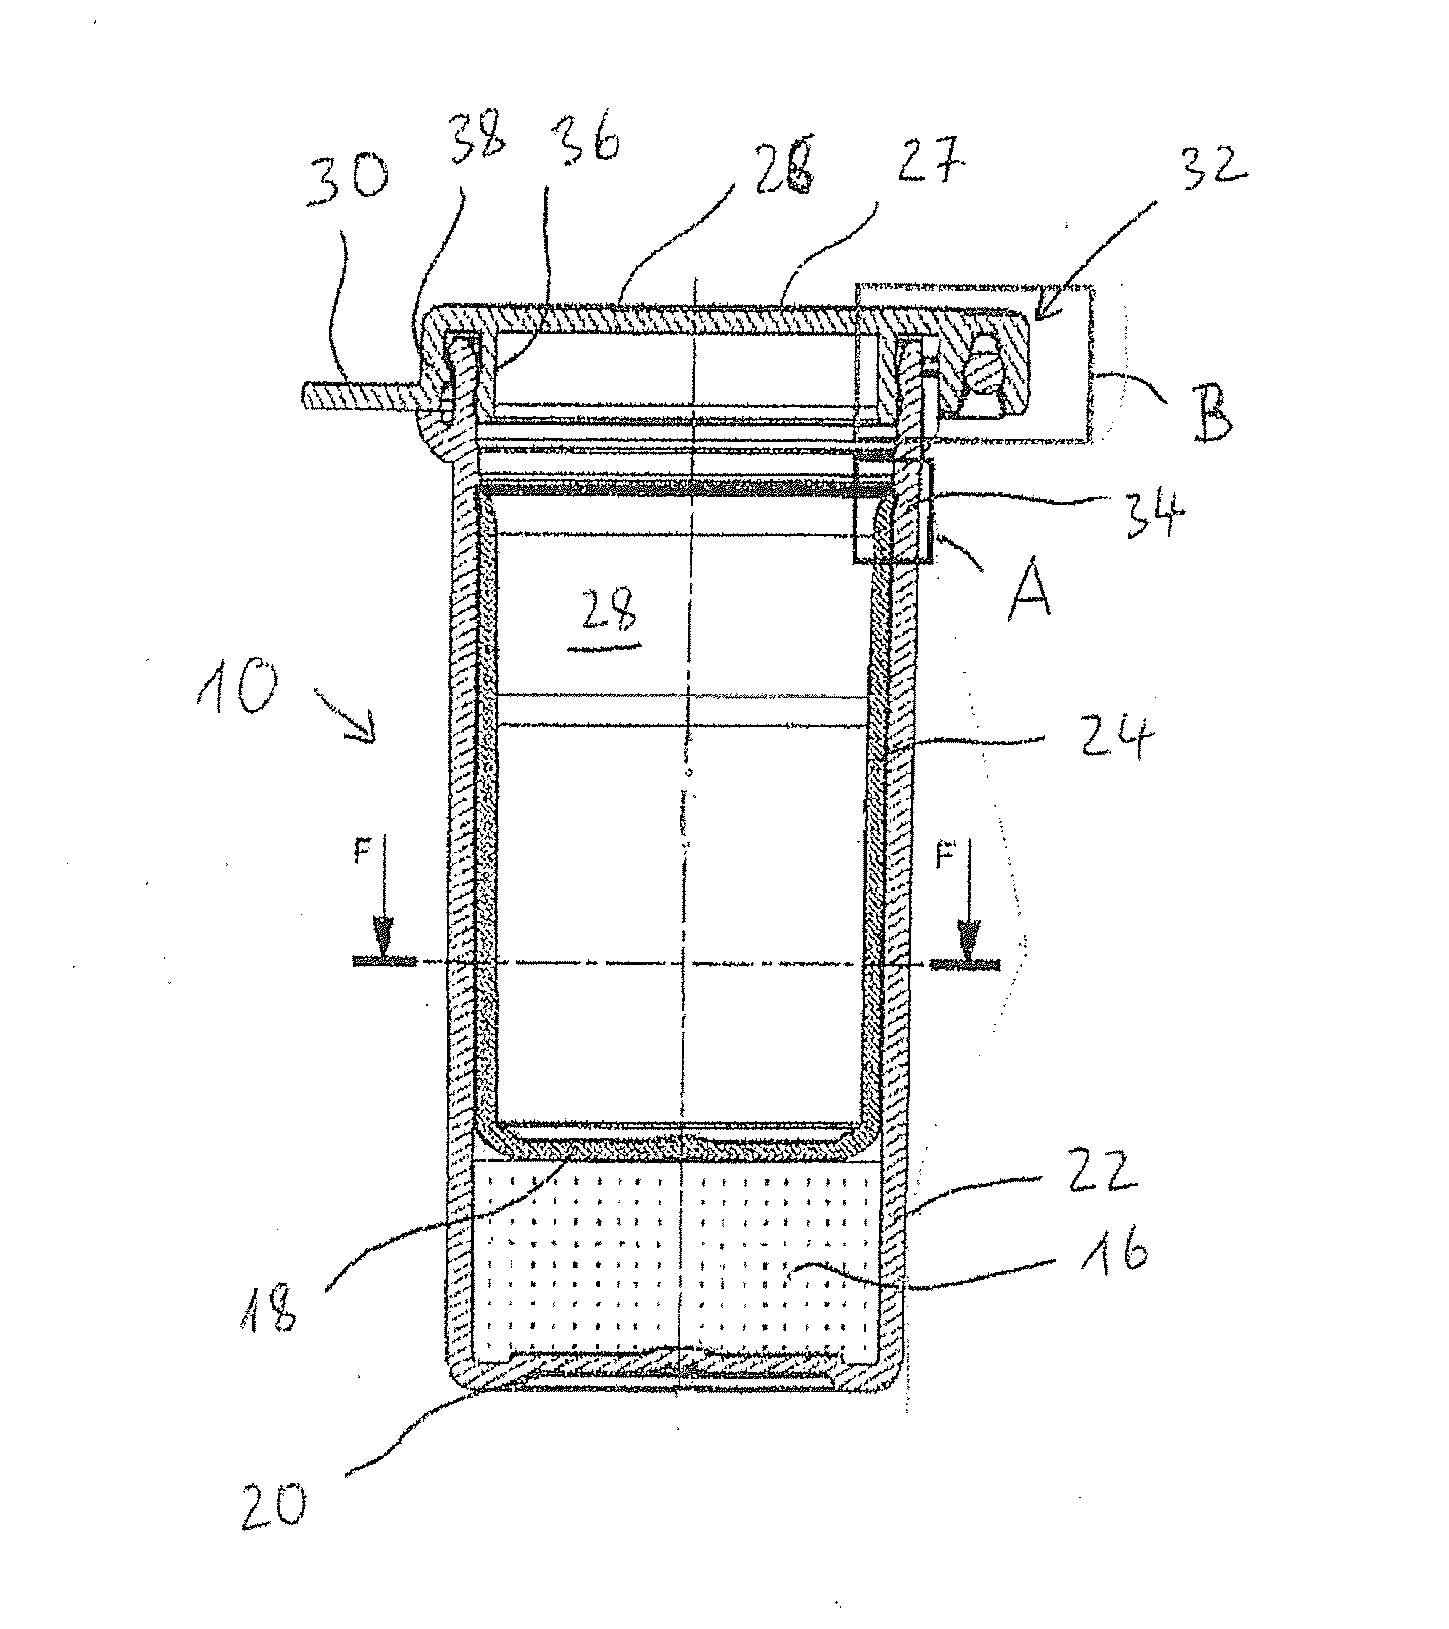 Container for receiving moisture sensitive goods